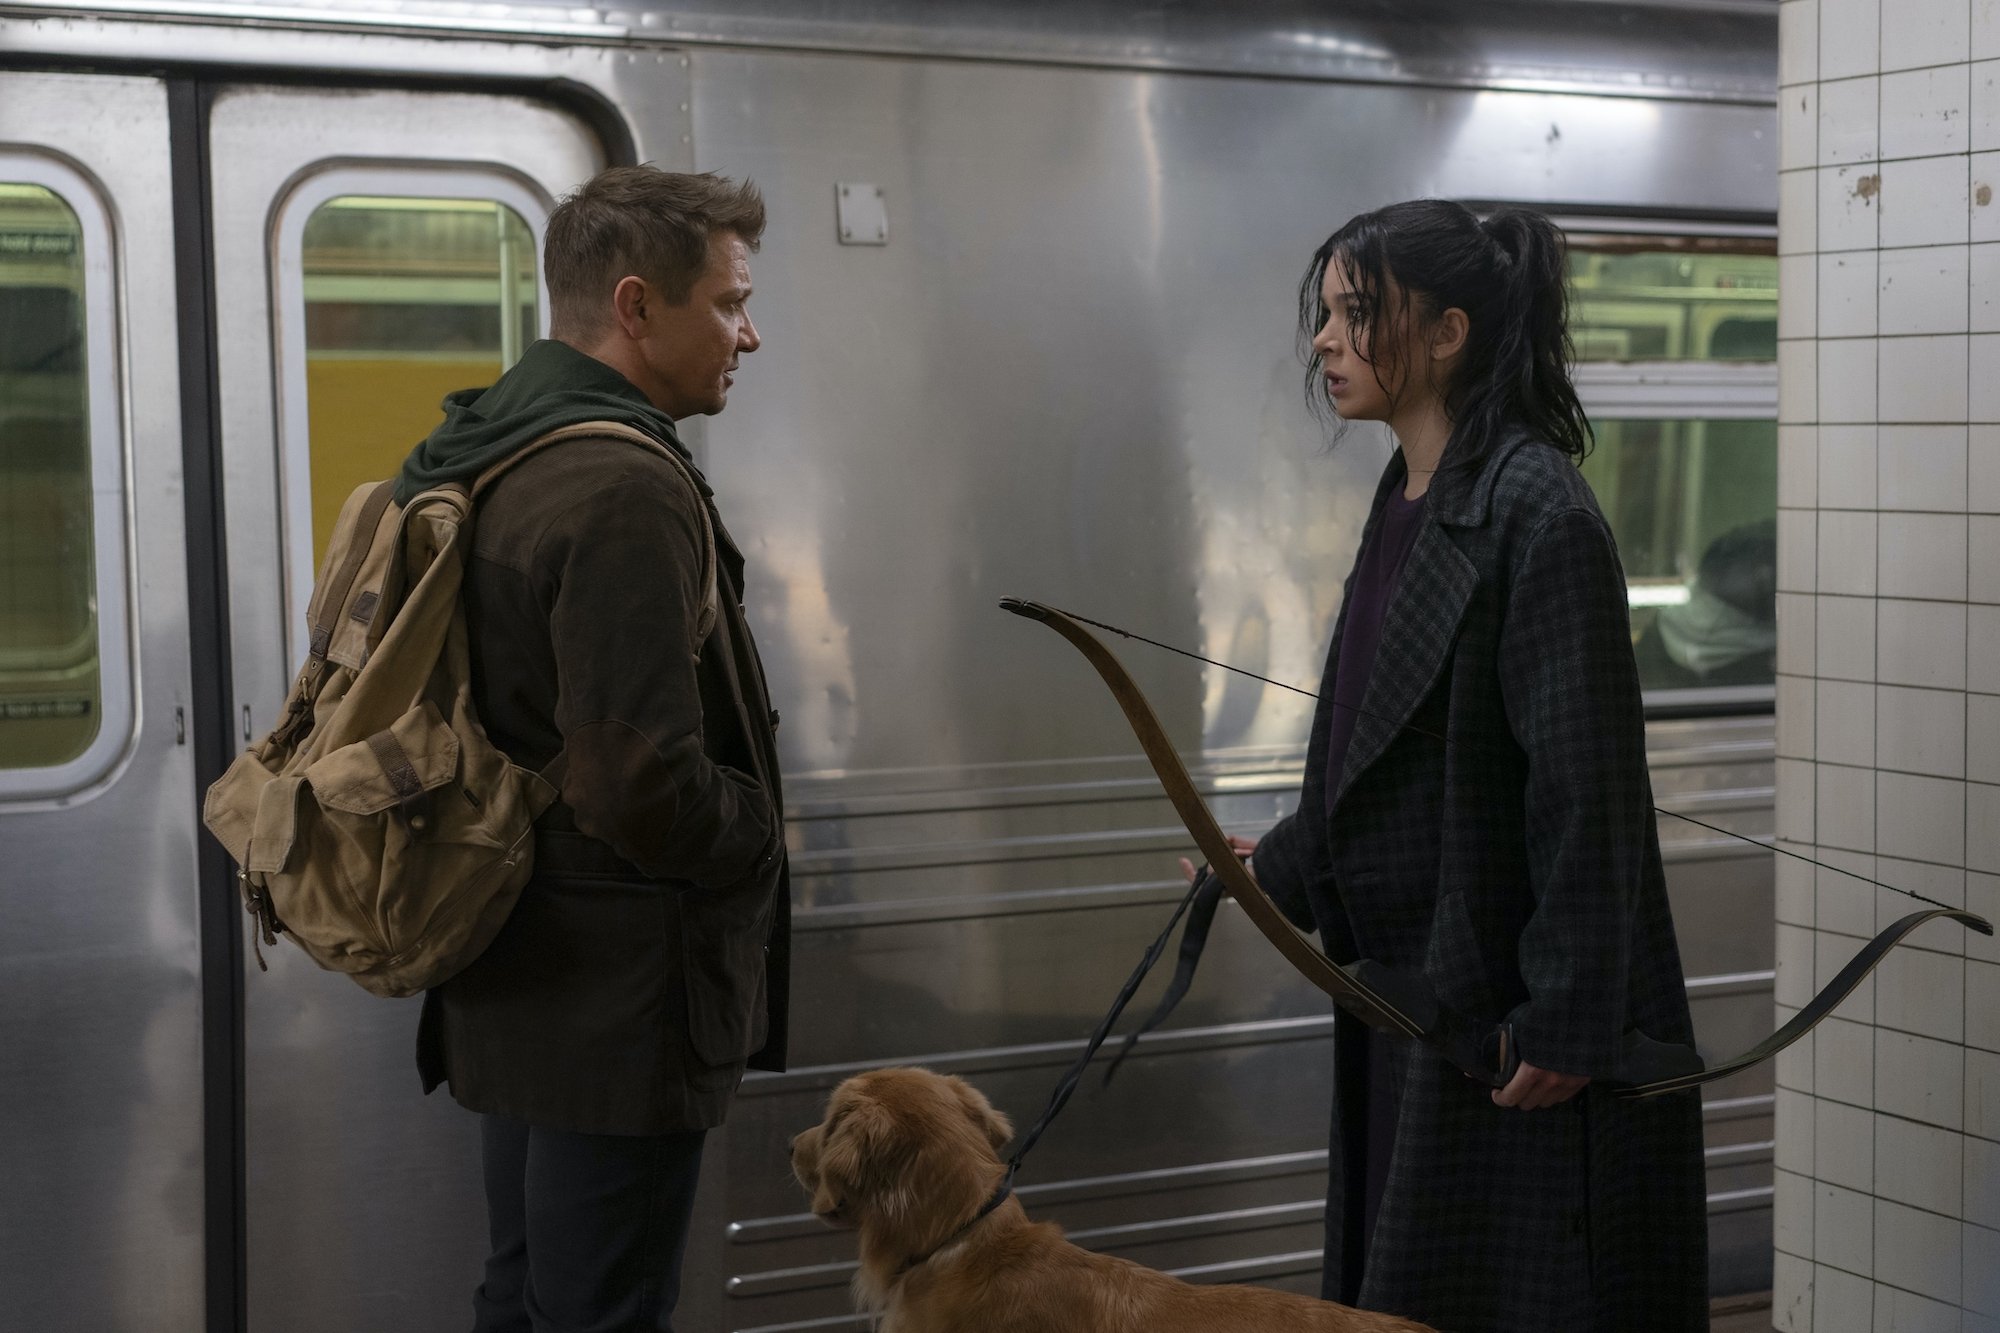 Jeremy Renner as Clint Barton and Hailee Steinfeld as Kate Bishop in 'Hawkeye' | Marvel Studios